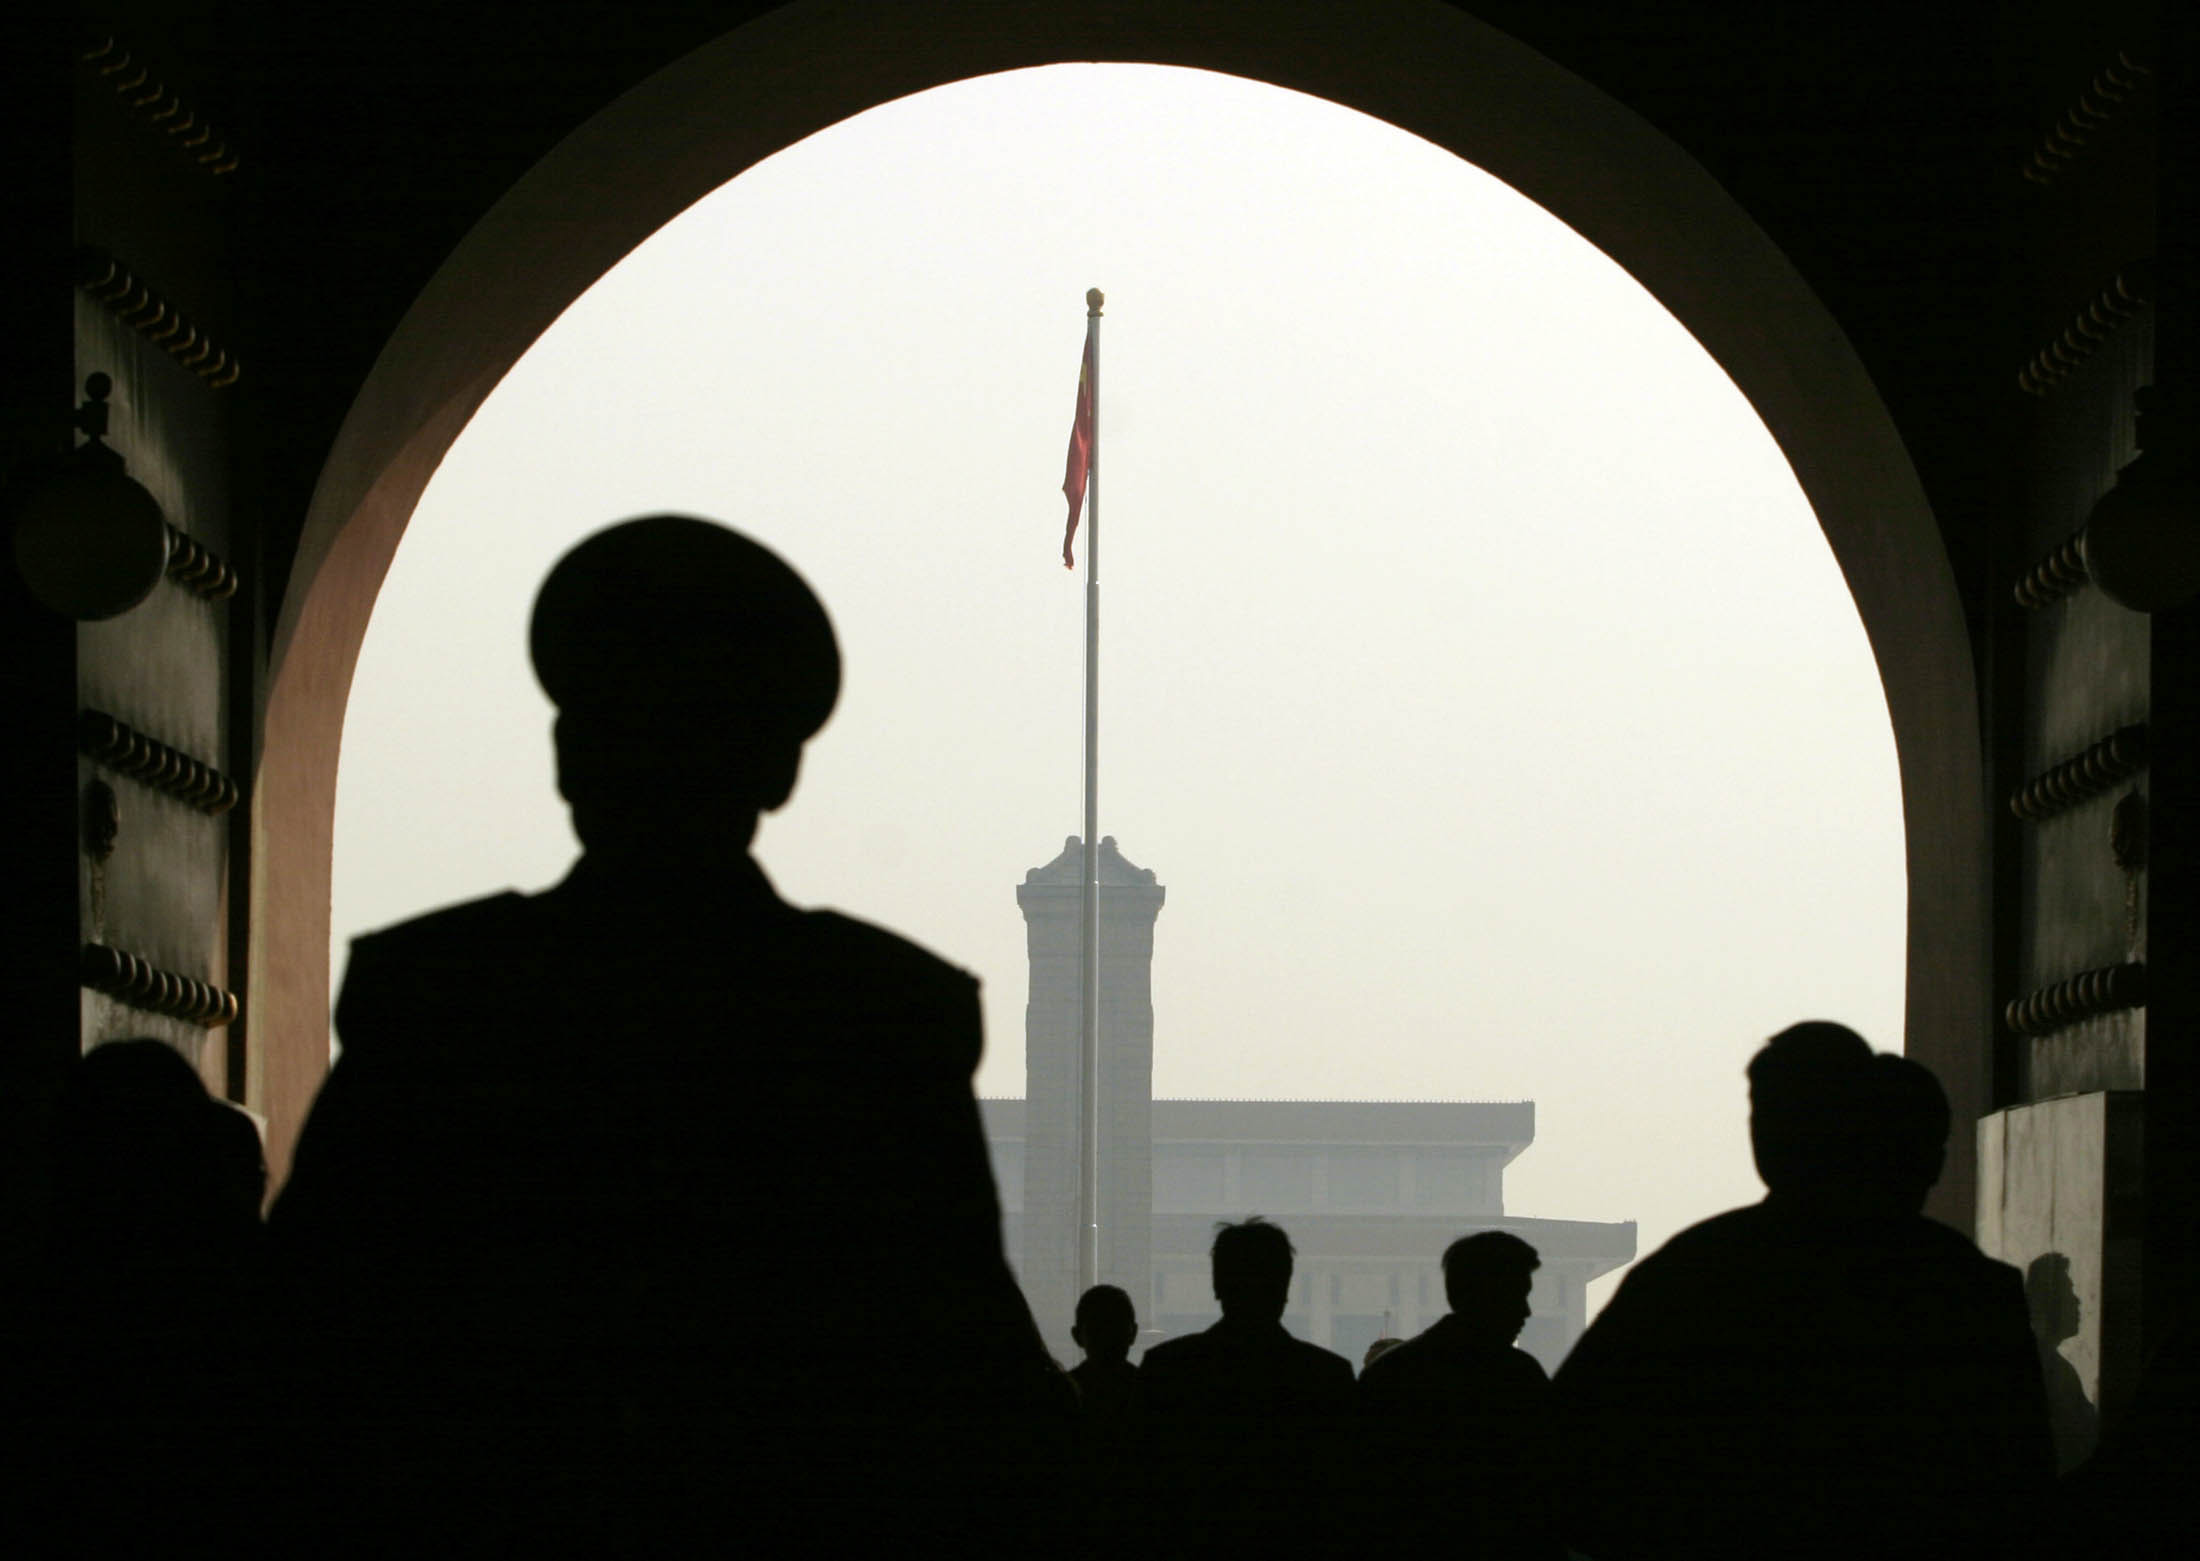 A Chinese policeman patrols Tiananmen Square as China's leaders arrive for the country's annual congress NPC, the National People's Congress, in Beijing 08 March 2004.
